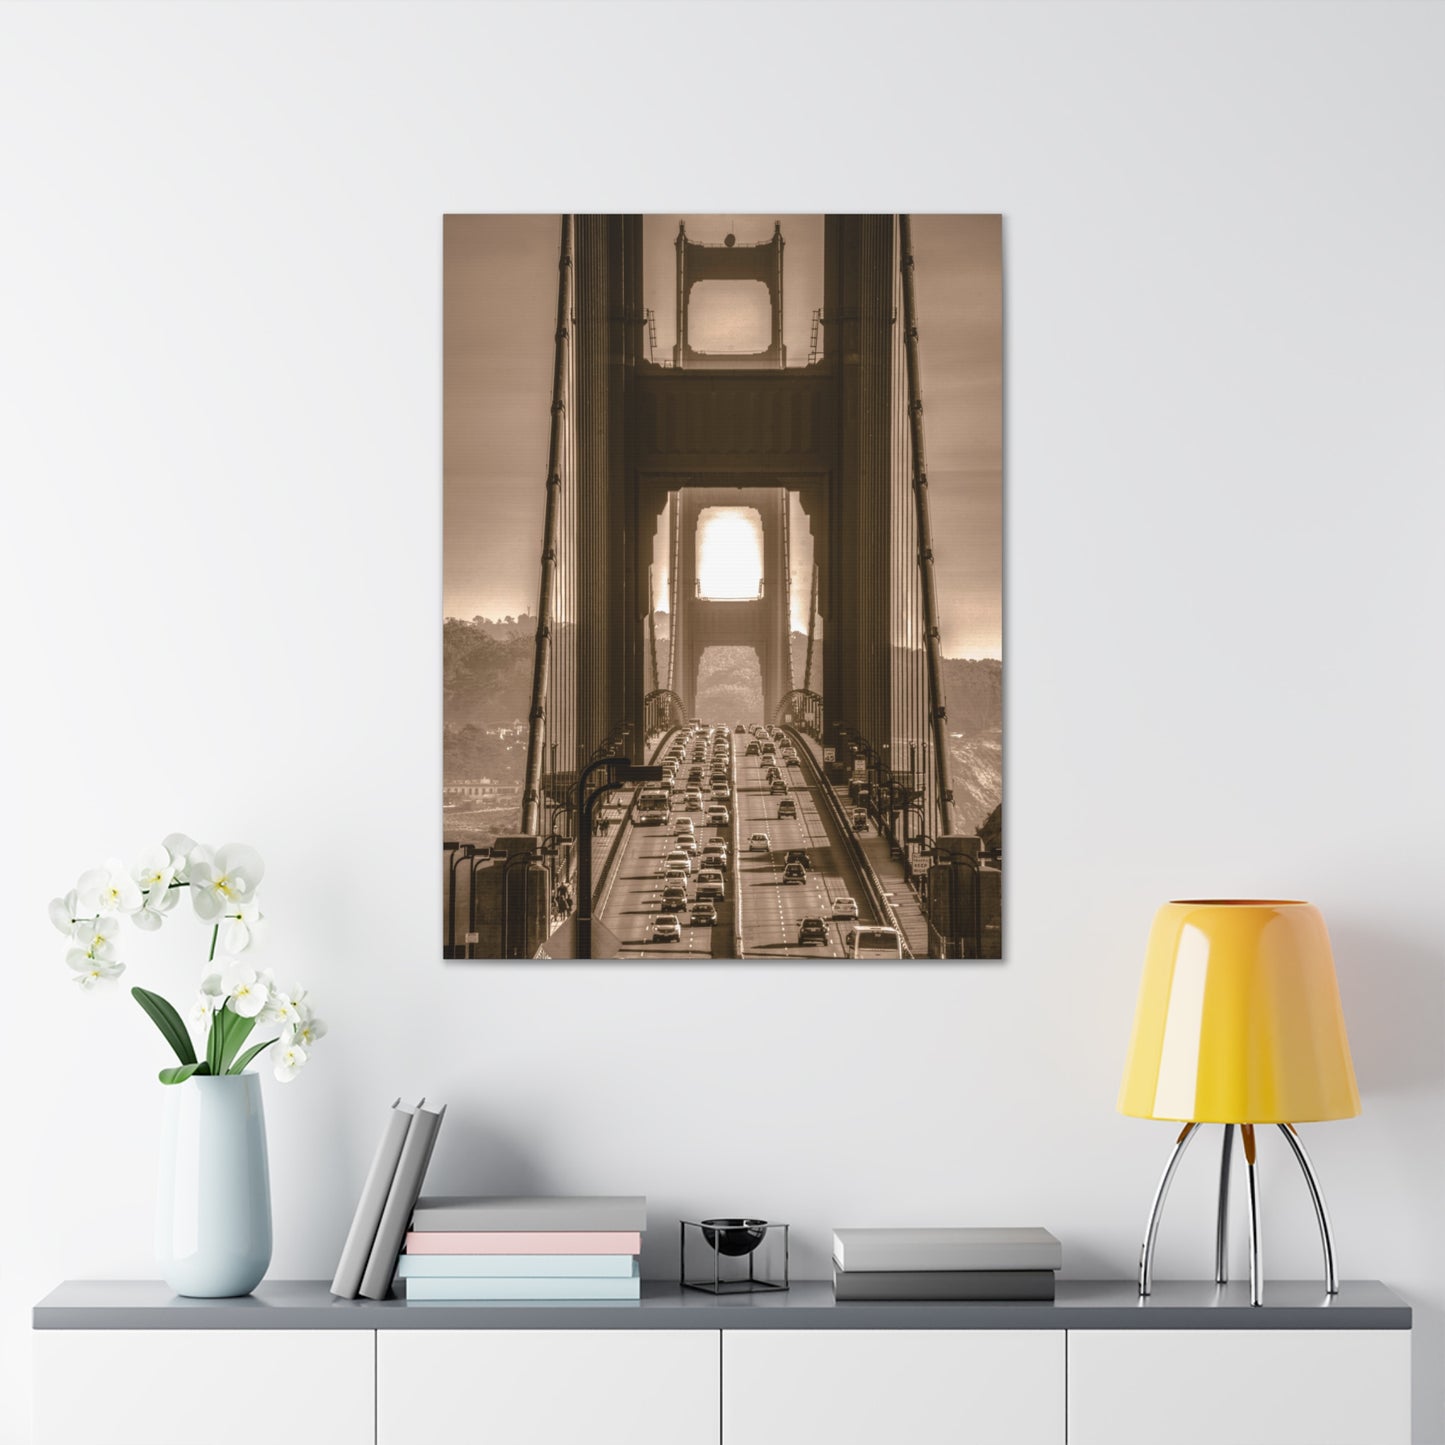 Canvas Print Of Golden Gate Bridge Southbound In San Francisco For Wall Art